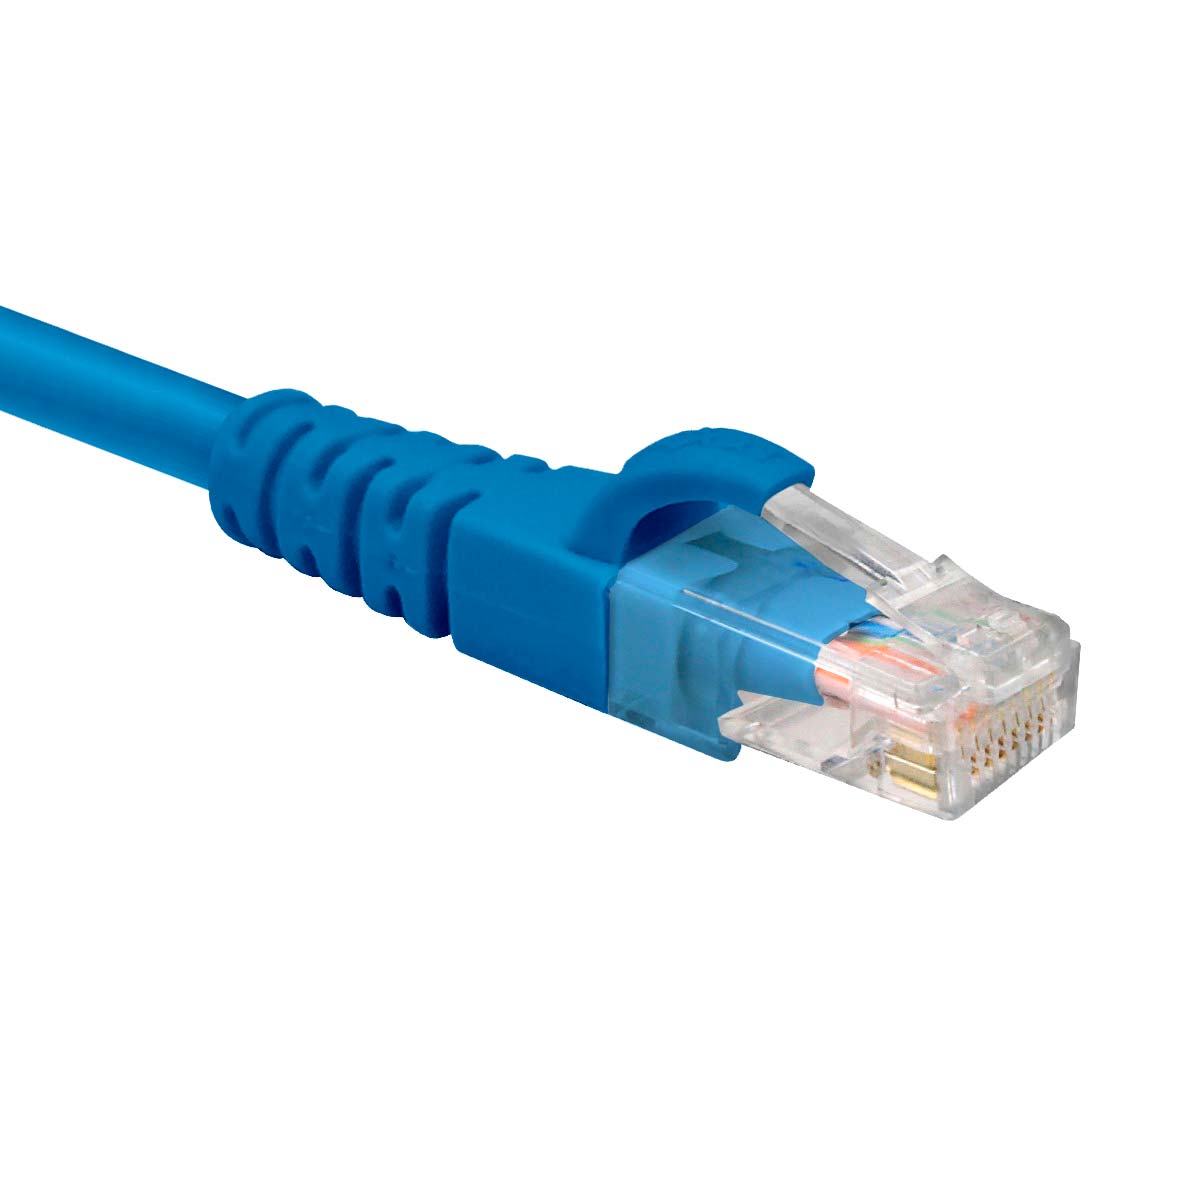 NEXXT CONECTOR RJ45 CAT6 – P/CABLE UTP – AW102NXT04 – Tienda CorchaCR